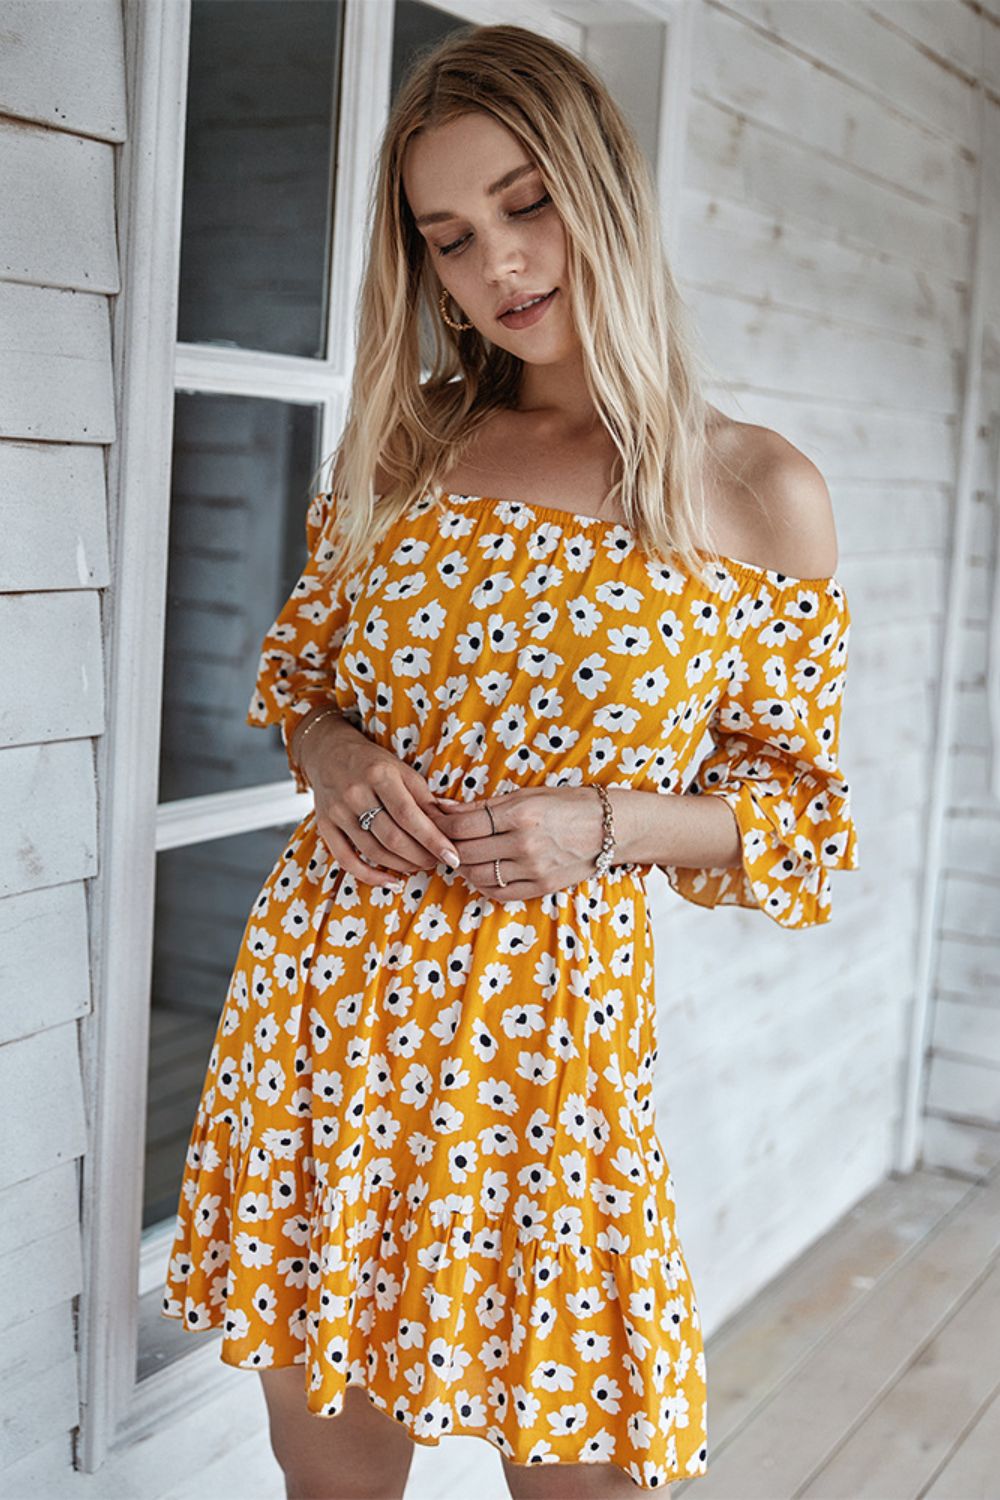 Dainty Daisy Off The Shoulder Dress - Yellow / S - All Dresses - Dresses - 1 - 2024